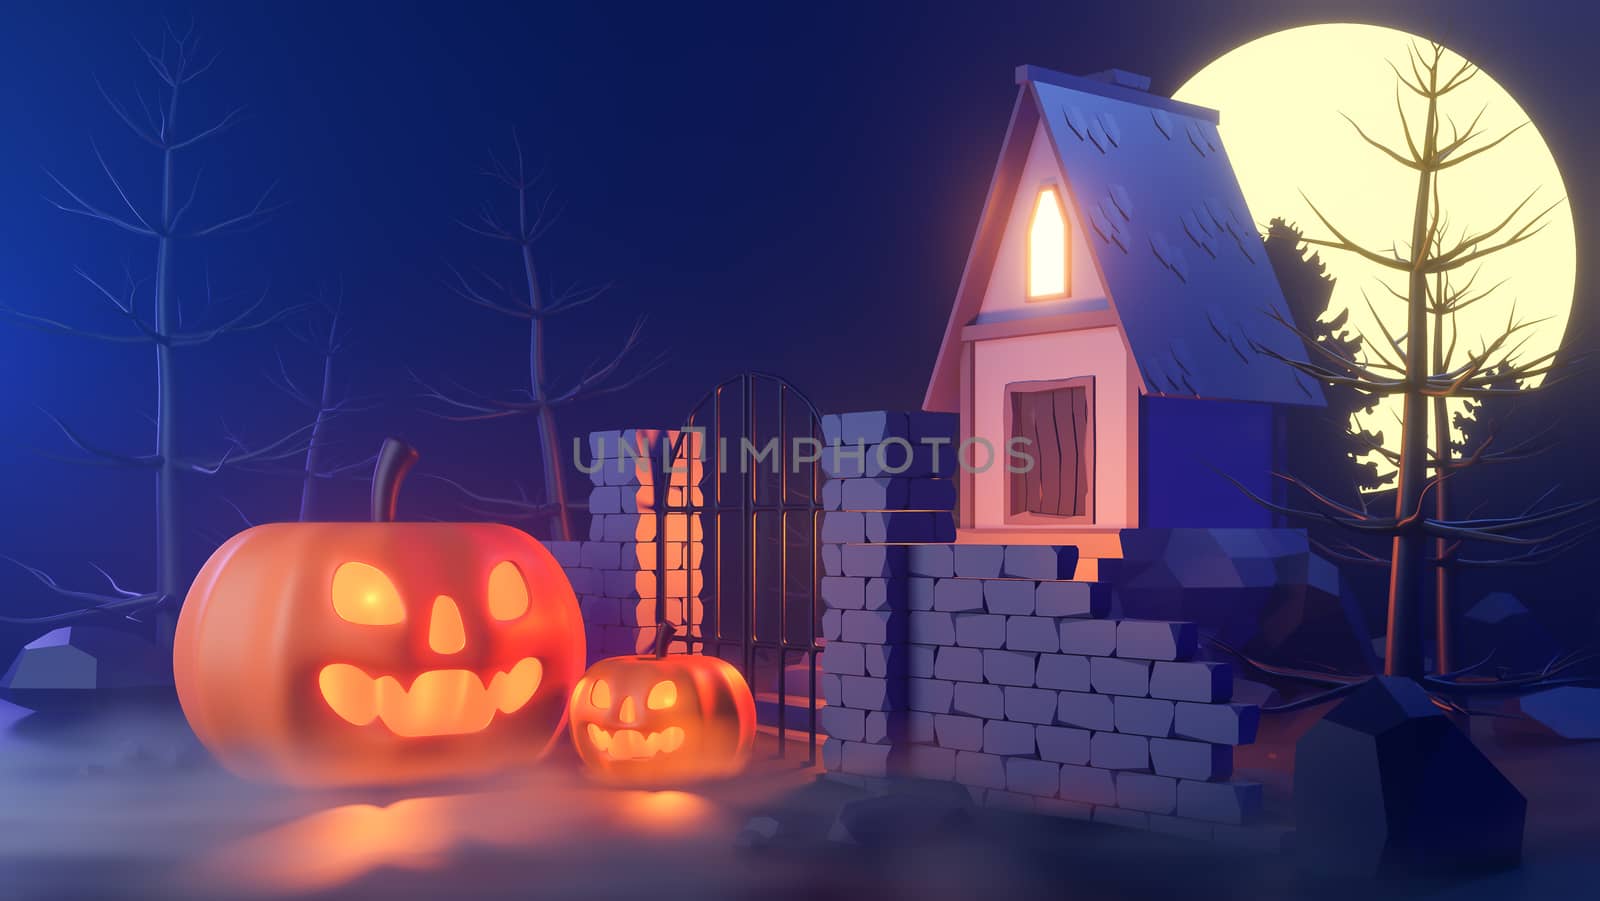 halloween theme with pumpkins and a house at night.,3d model and illustration.